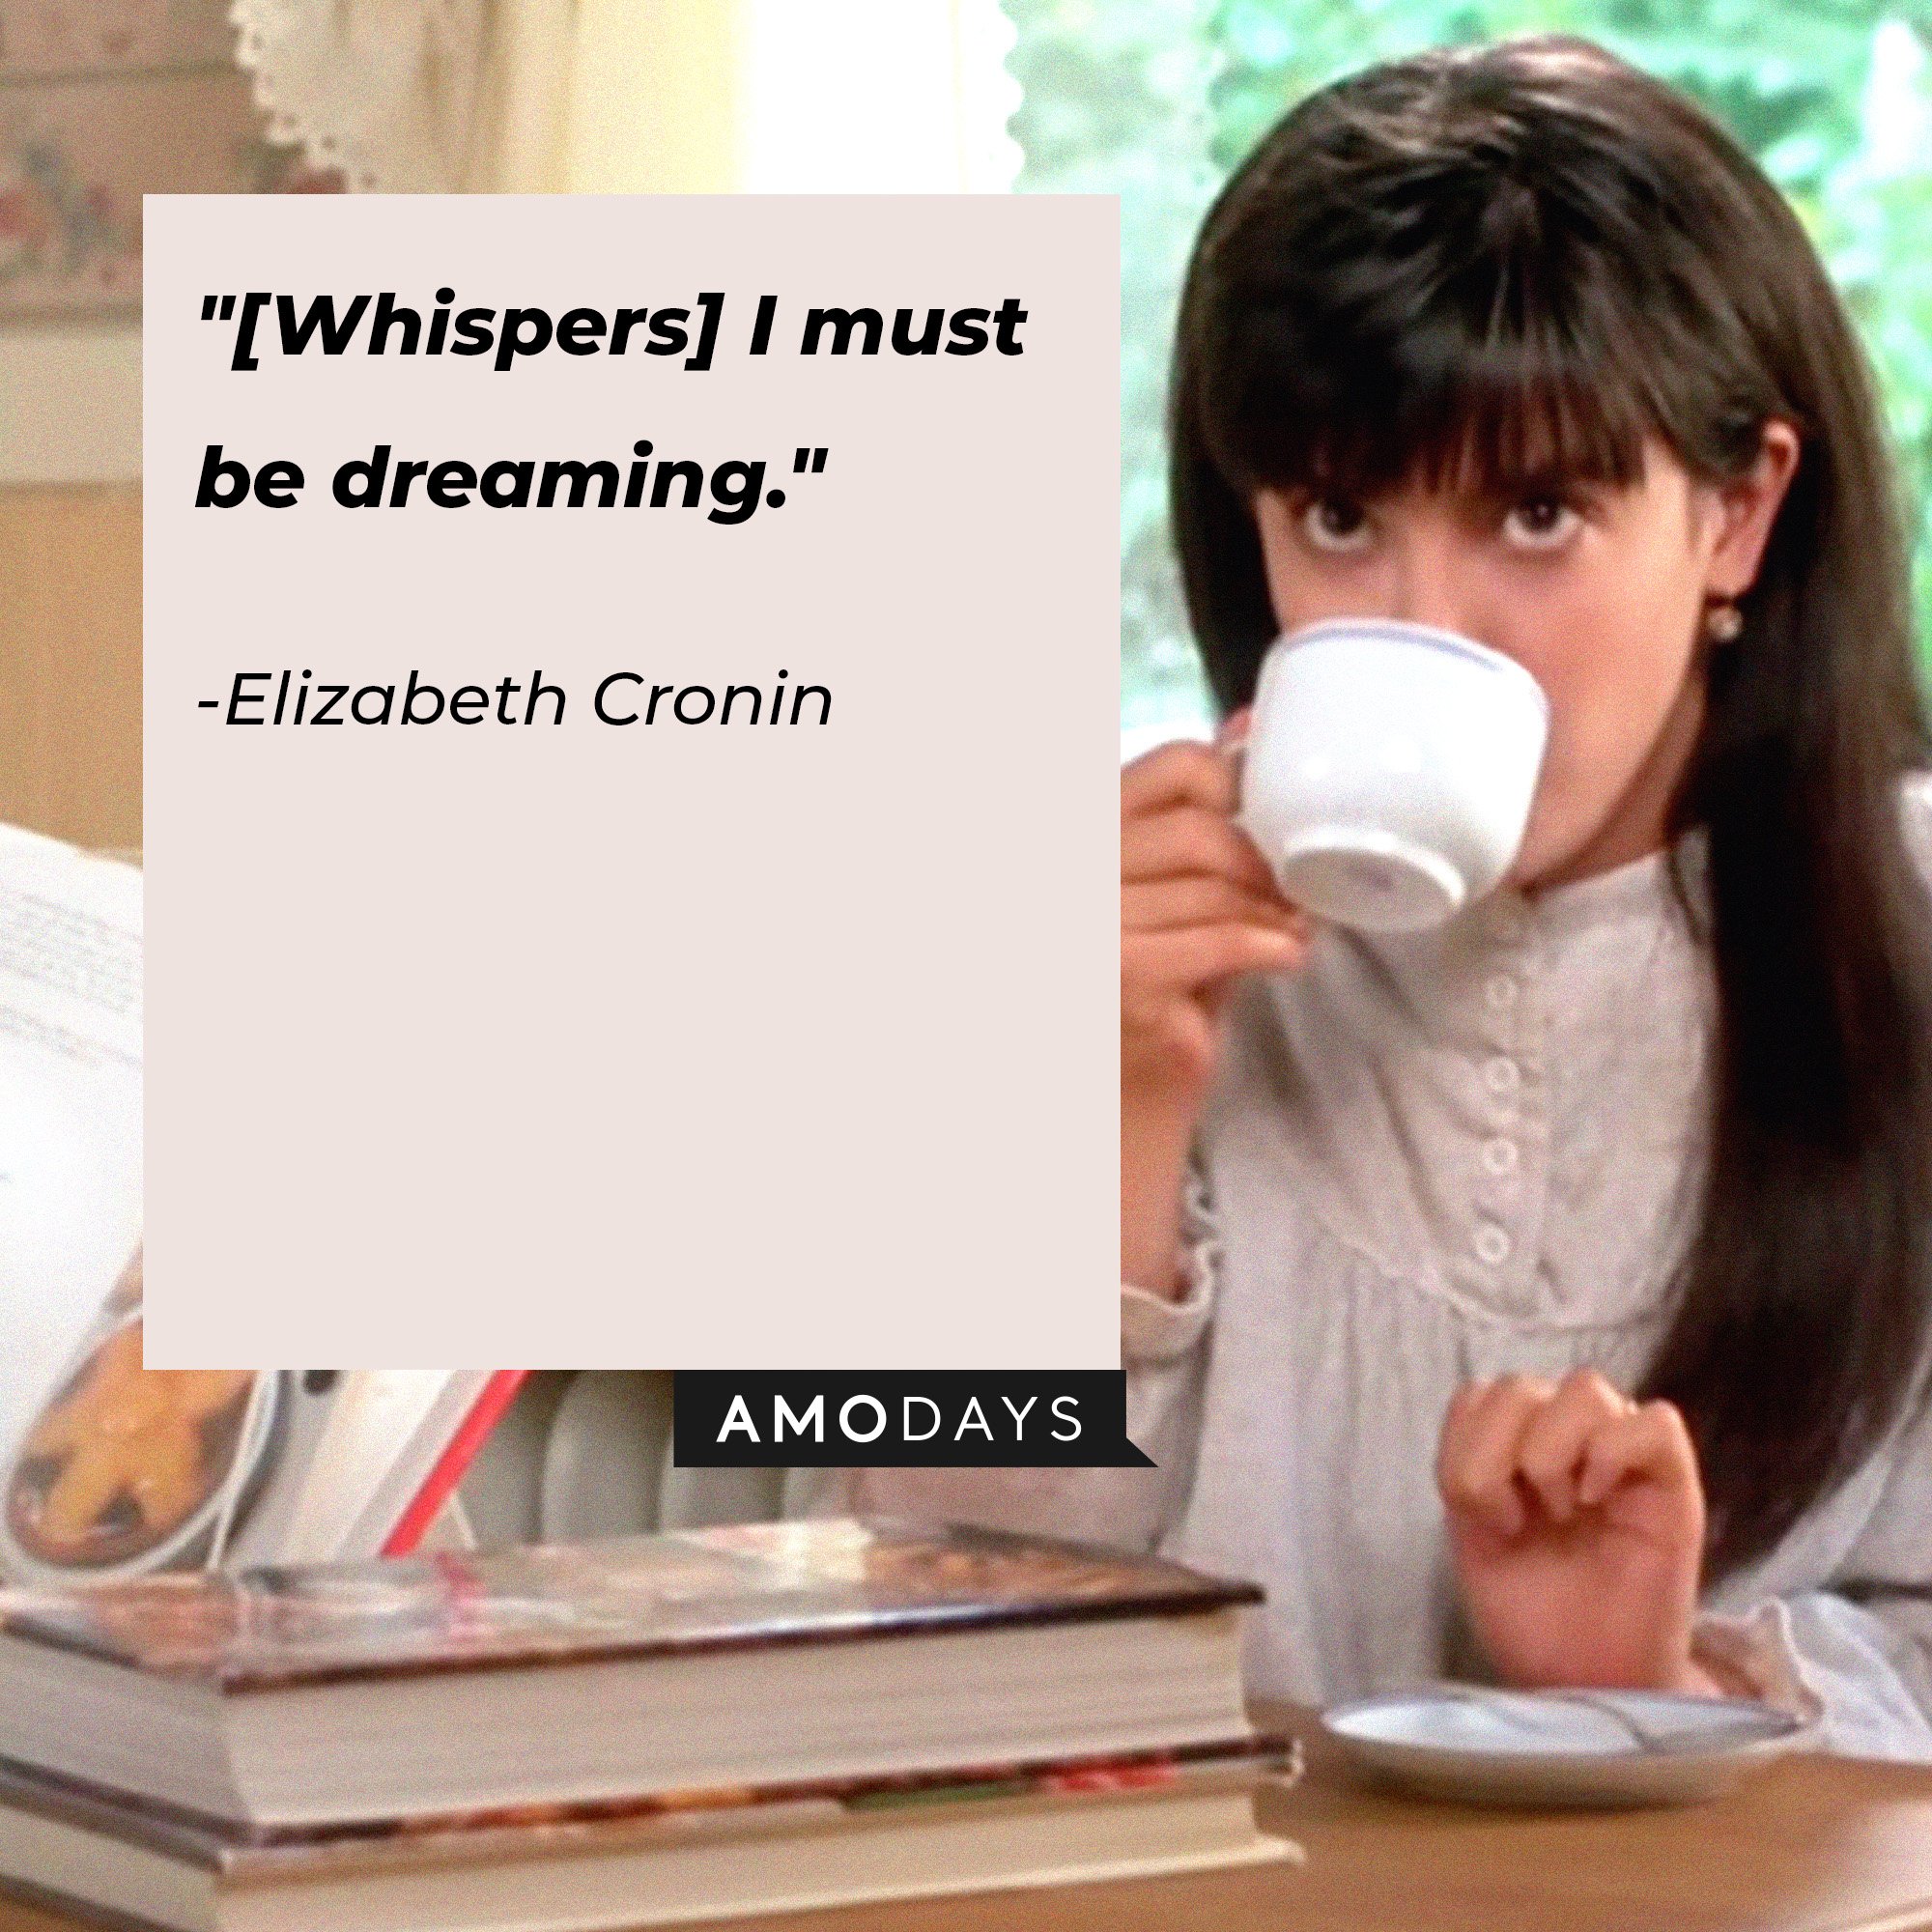 Elizabeth Cronin’s quote: "[Whispers] I must be dreaming." | Image: AmoDays